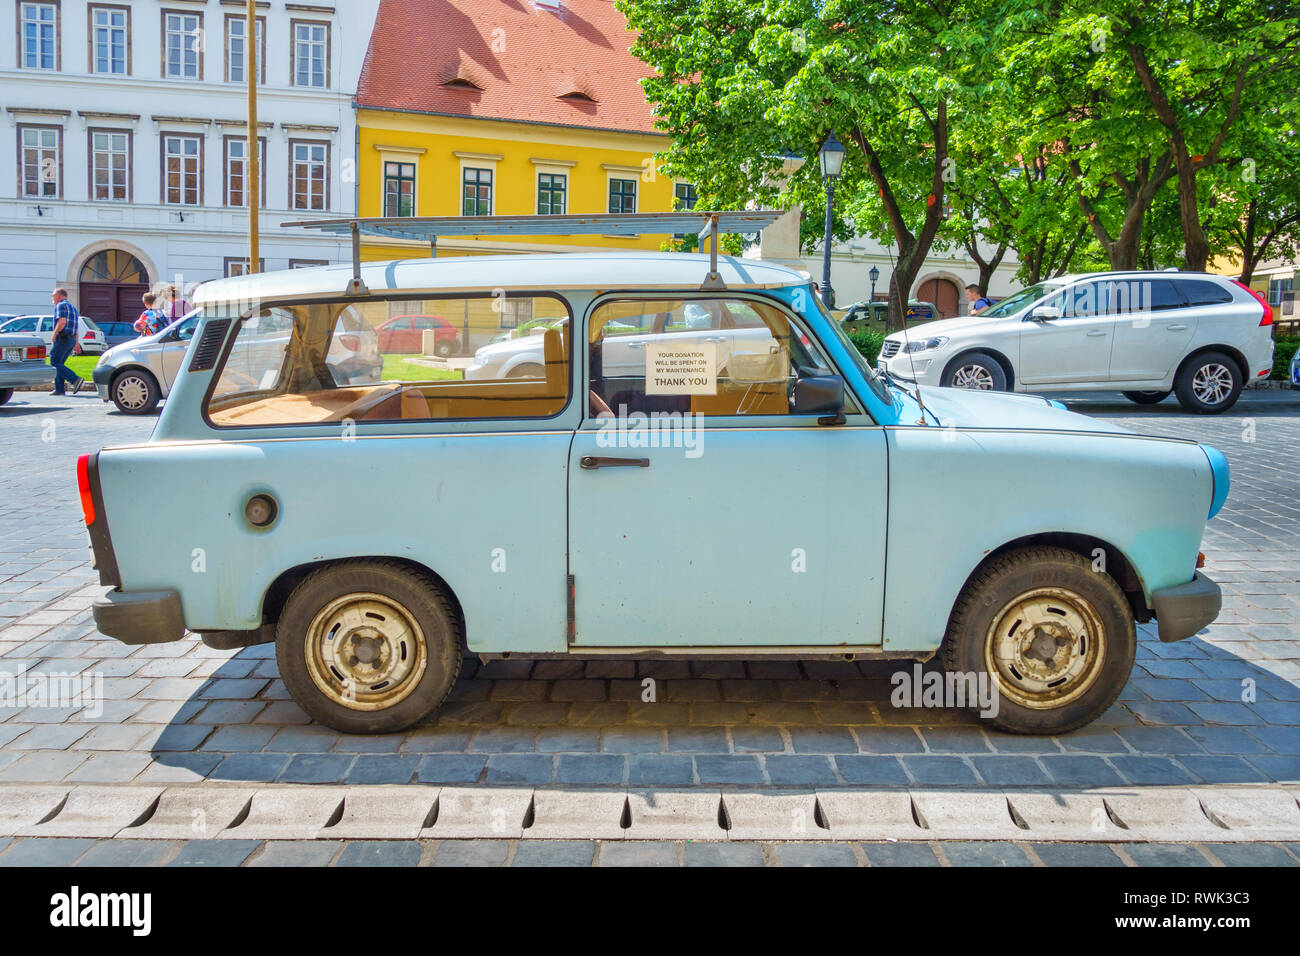 A Trabant, an Eastern European Vintage Car made in East Germany, is parked  on a street in Budapest, Hungary. Stock Photo